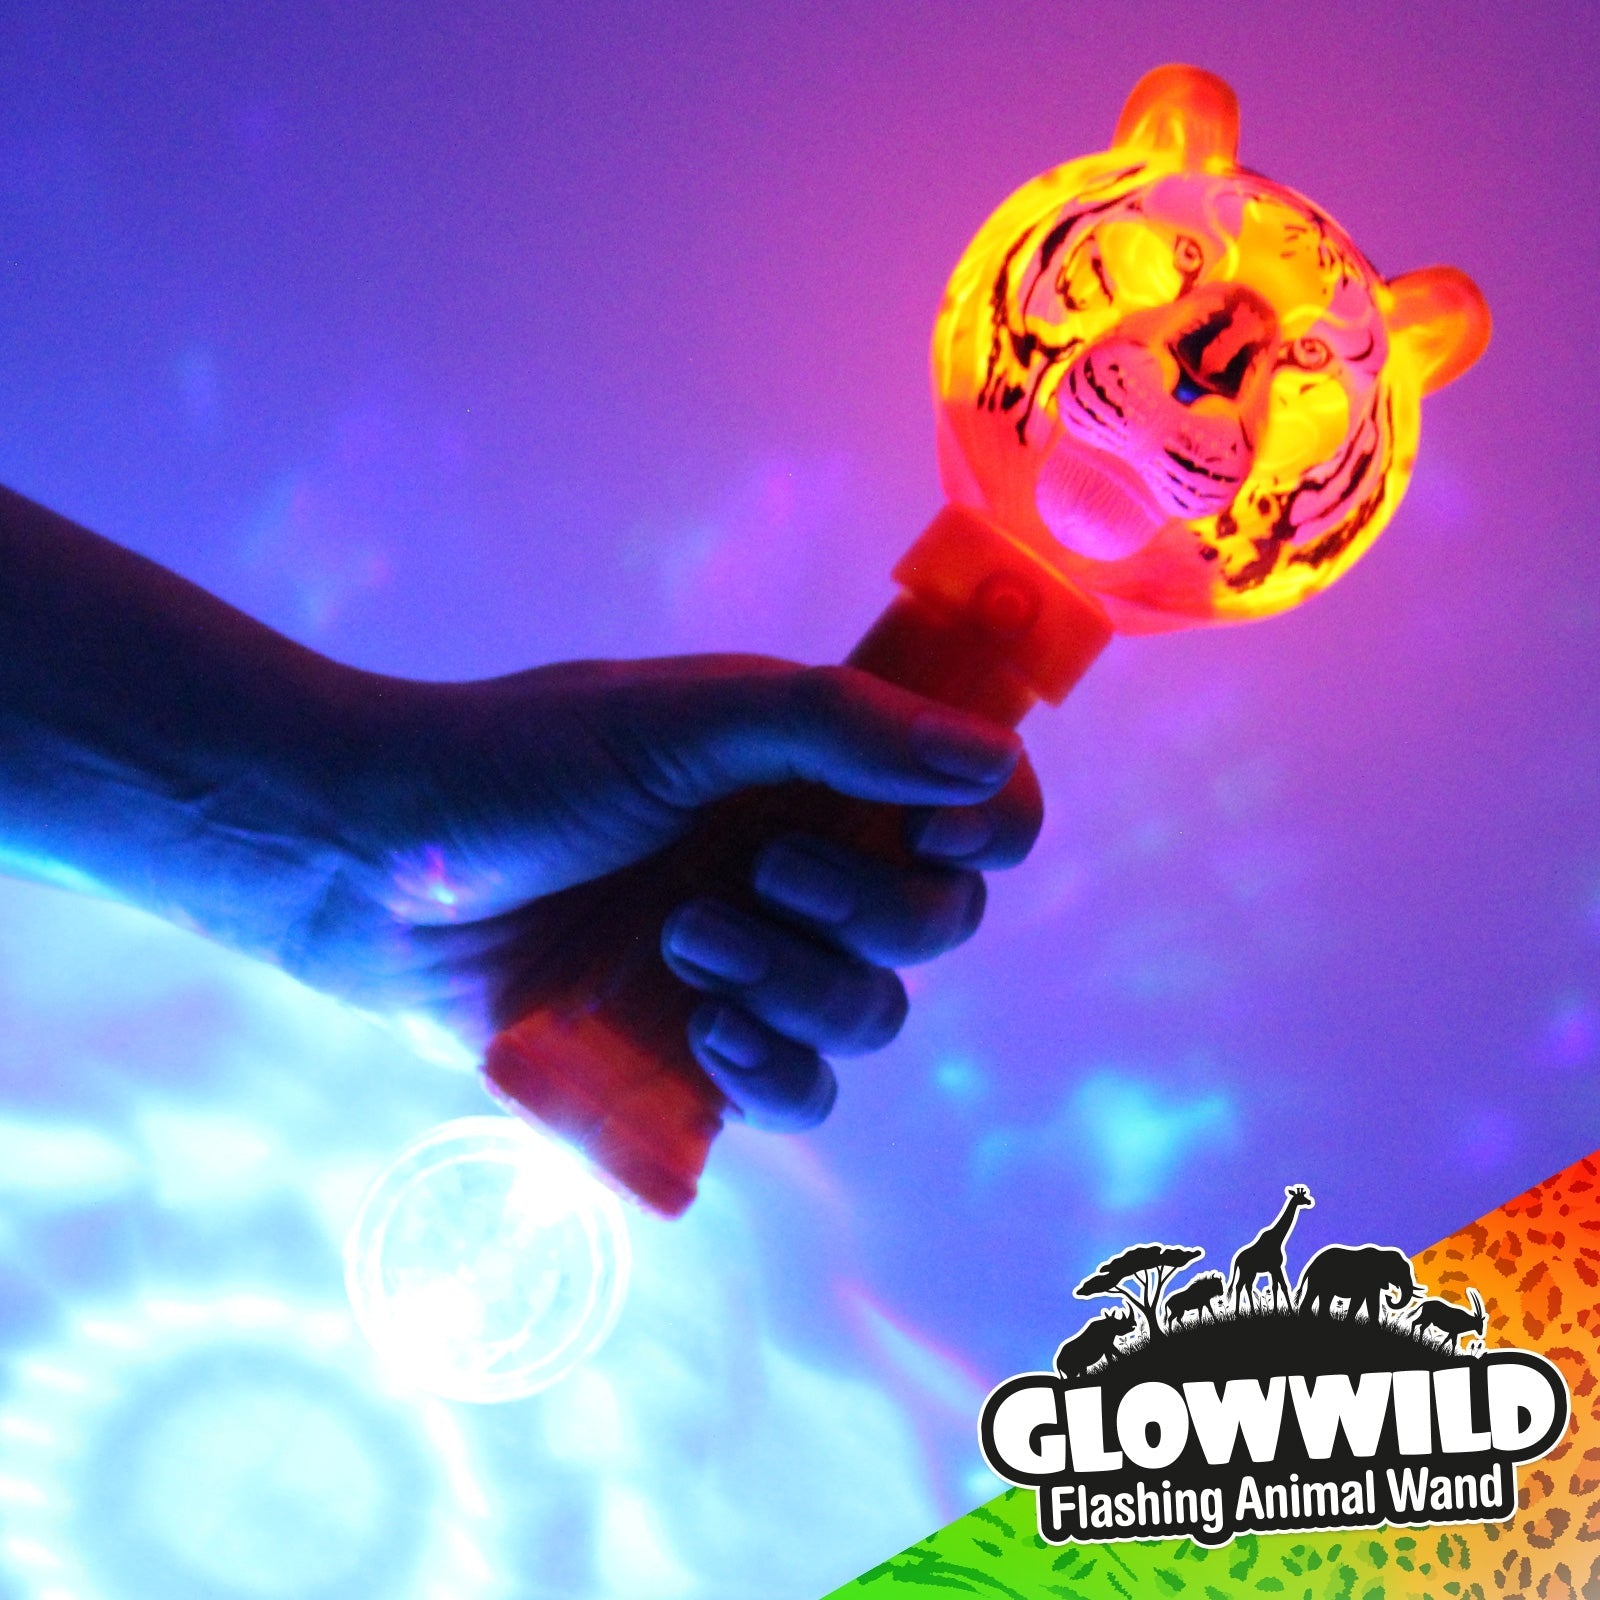 Tiger Mega Light Up Animal Wand 11", Tiger, tiger burning bright! This funky tiger wand shines very brightly with multi coloured, multi function LEDs! A large wand measuring 11" long, this colourful baton is topped with a proud tiger head that illuminates and shines through a loop of incredible colour change effects! With a simple on/of function, this funky tiger wand is finished with a disco ball at the base that projects colour flash effects onto surrounding surfaces ramping up the fun factor! Tiger Mega 